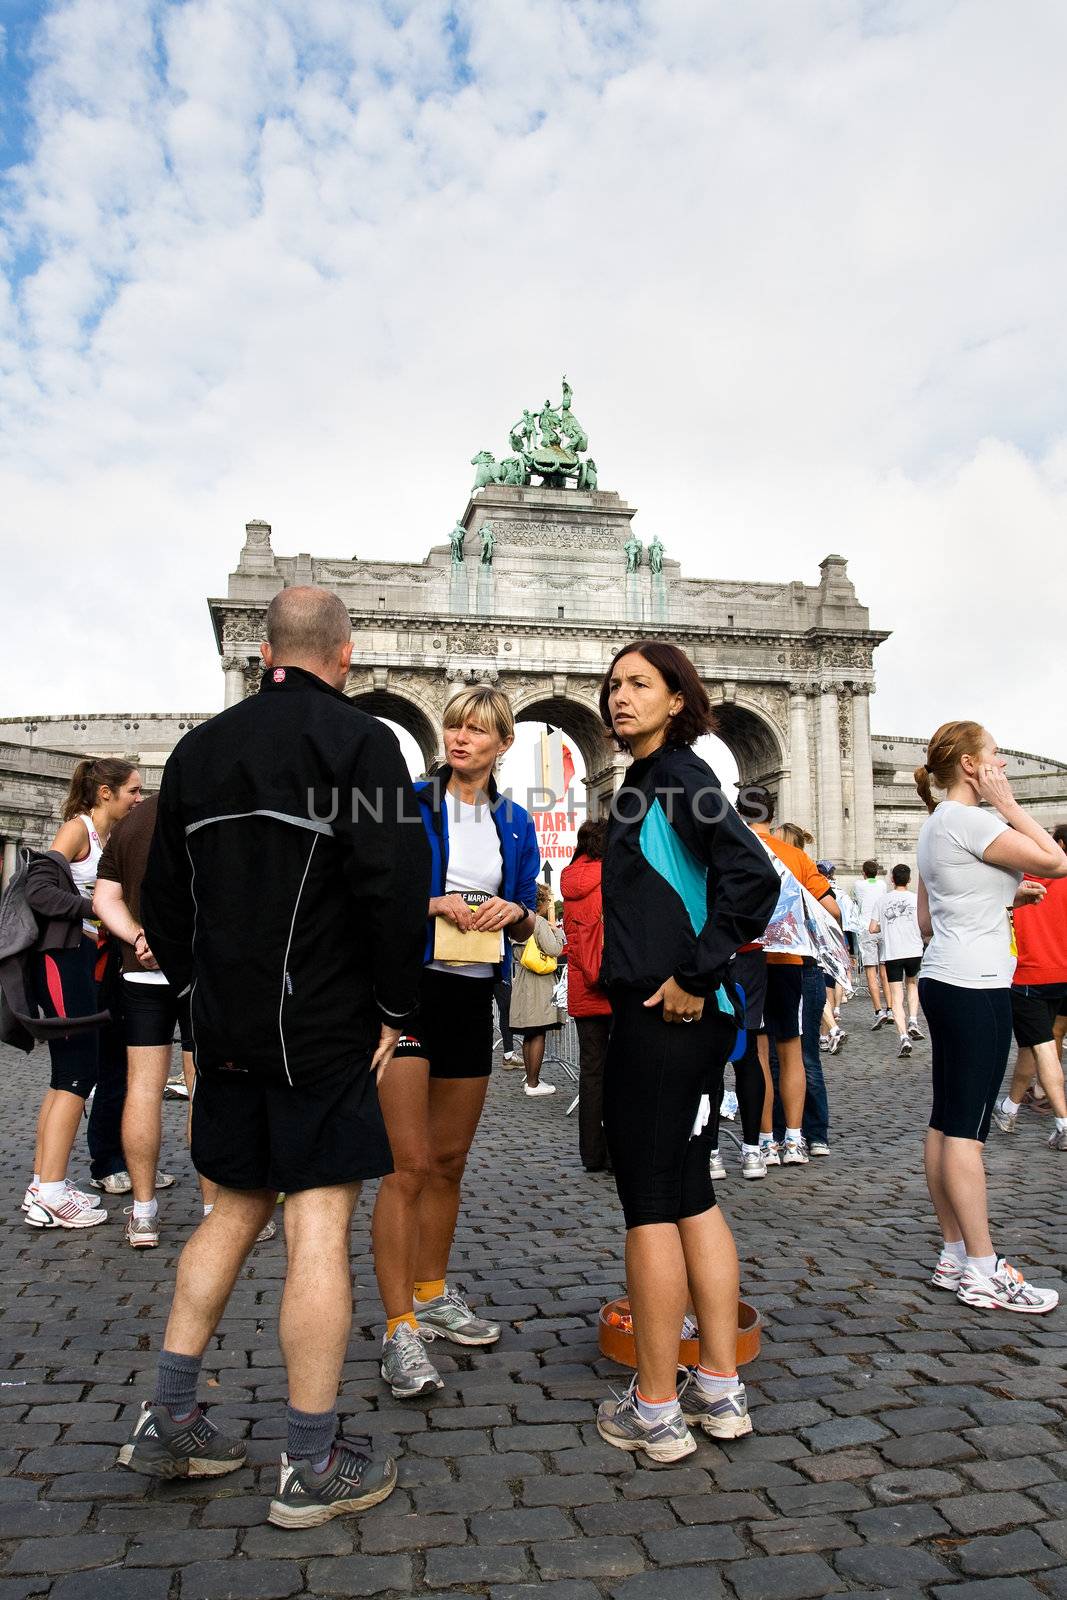 BRUSSELS - OCTOBER 4: Participants of Brussels half marathon waiting for start at Triumphal arch. October 5, 2009, Belgium, Brussels